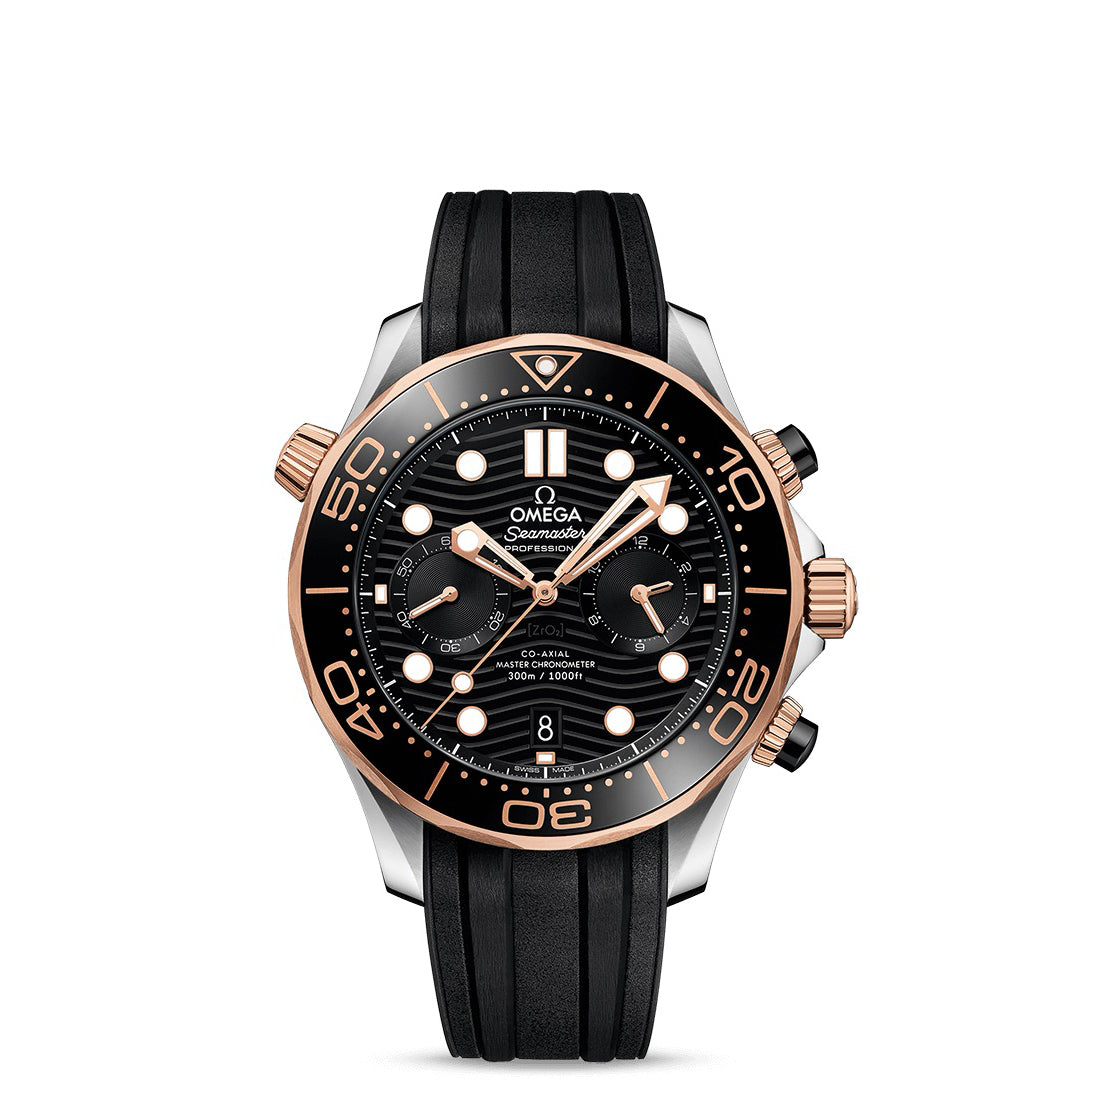 Omega Seamaster DIVER 300M CO‑AXIAL MASTER CHRONOMETER CHRONOGRAPH 44 MM 210.22.44.51.01.001